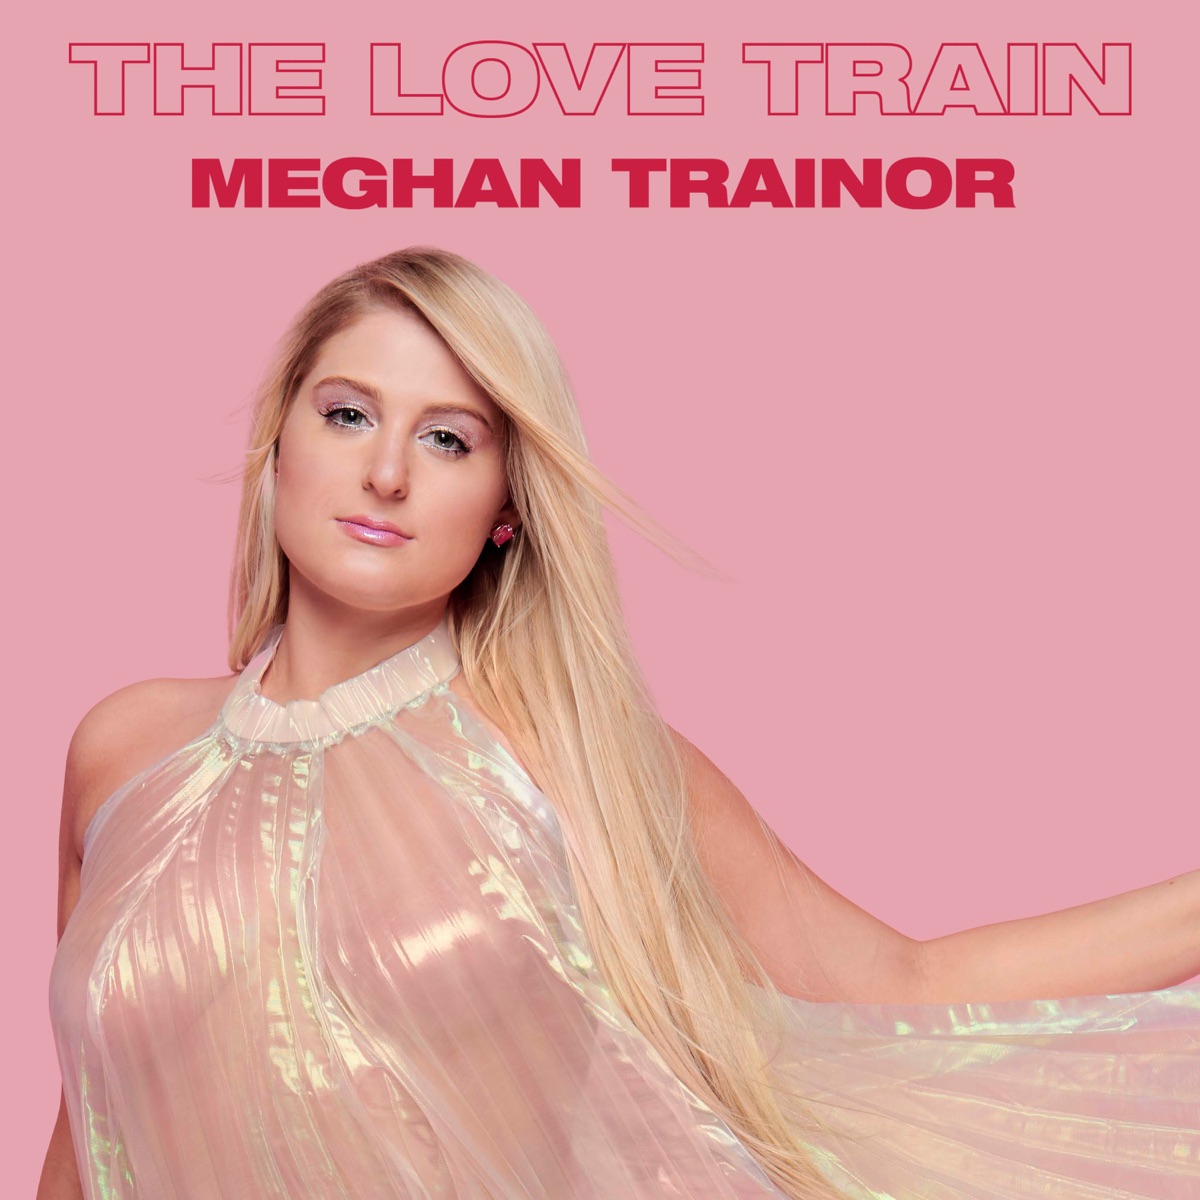 Made You Look by Meghan Trainor feat. Kim Petras on  Music 